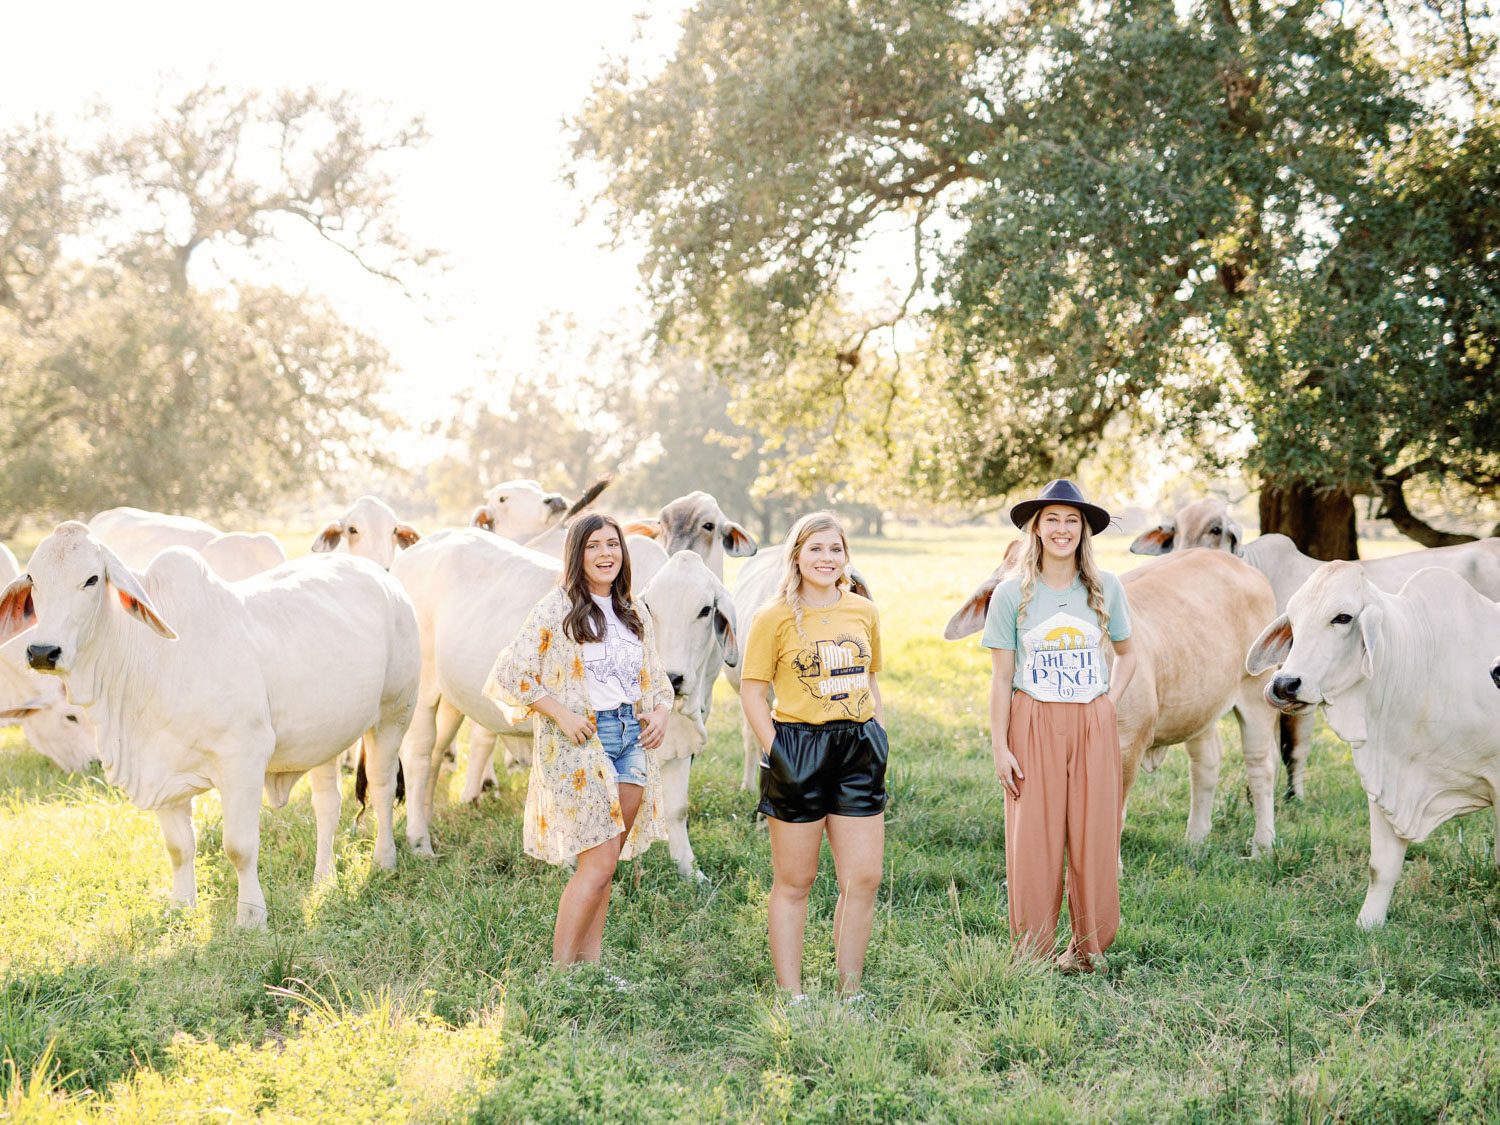 Visitors to the V8 Ranch in Houston, Texas